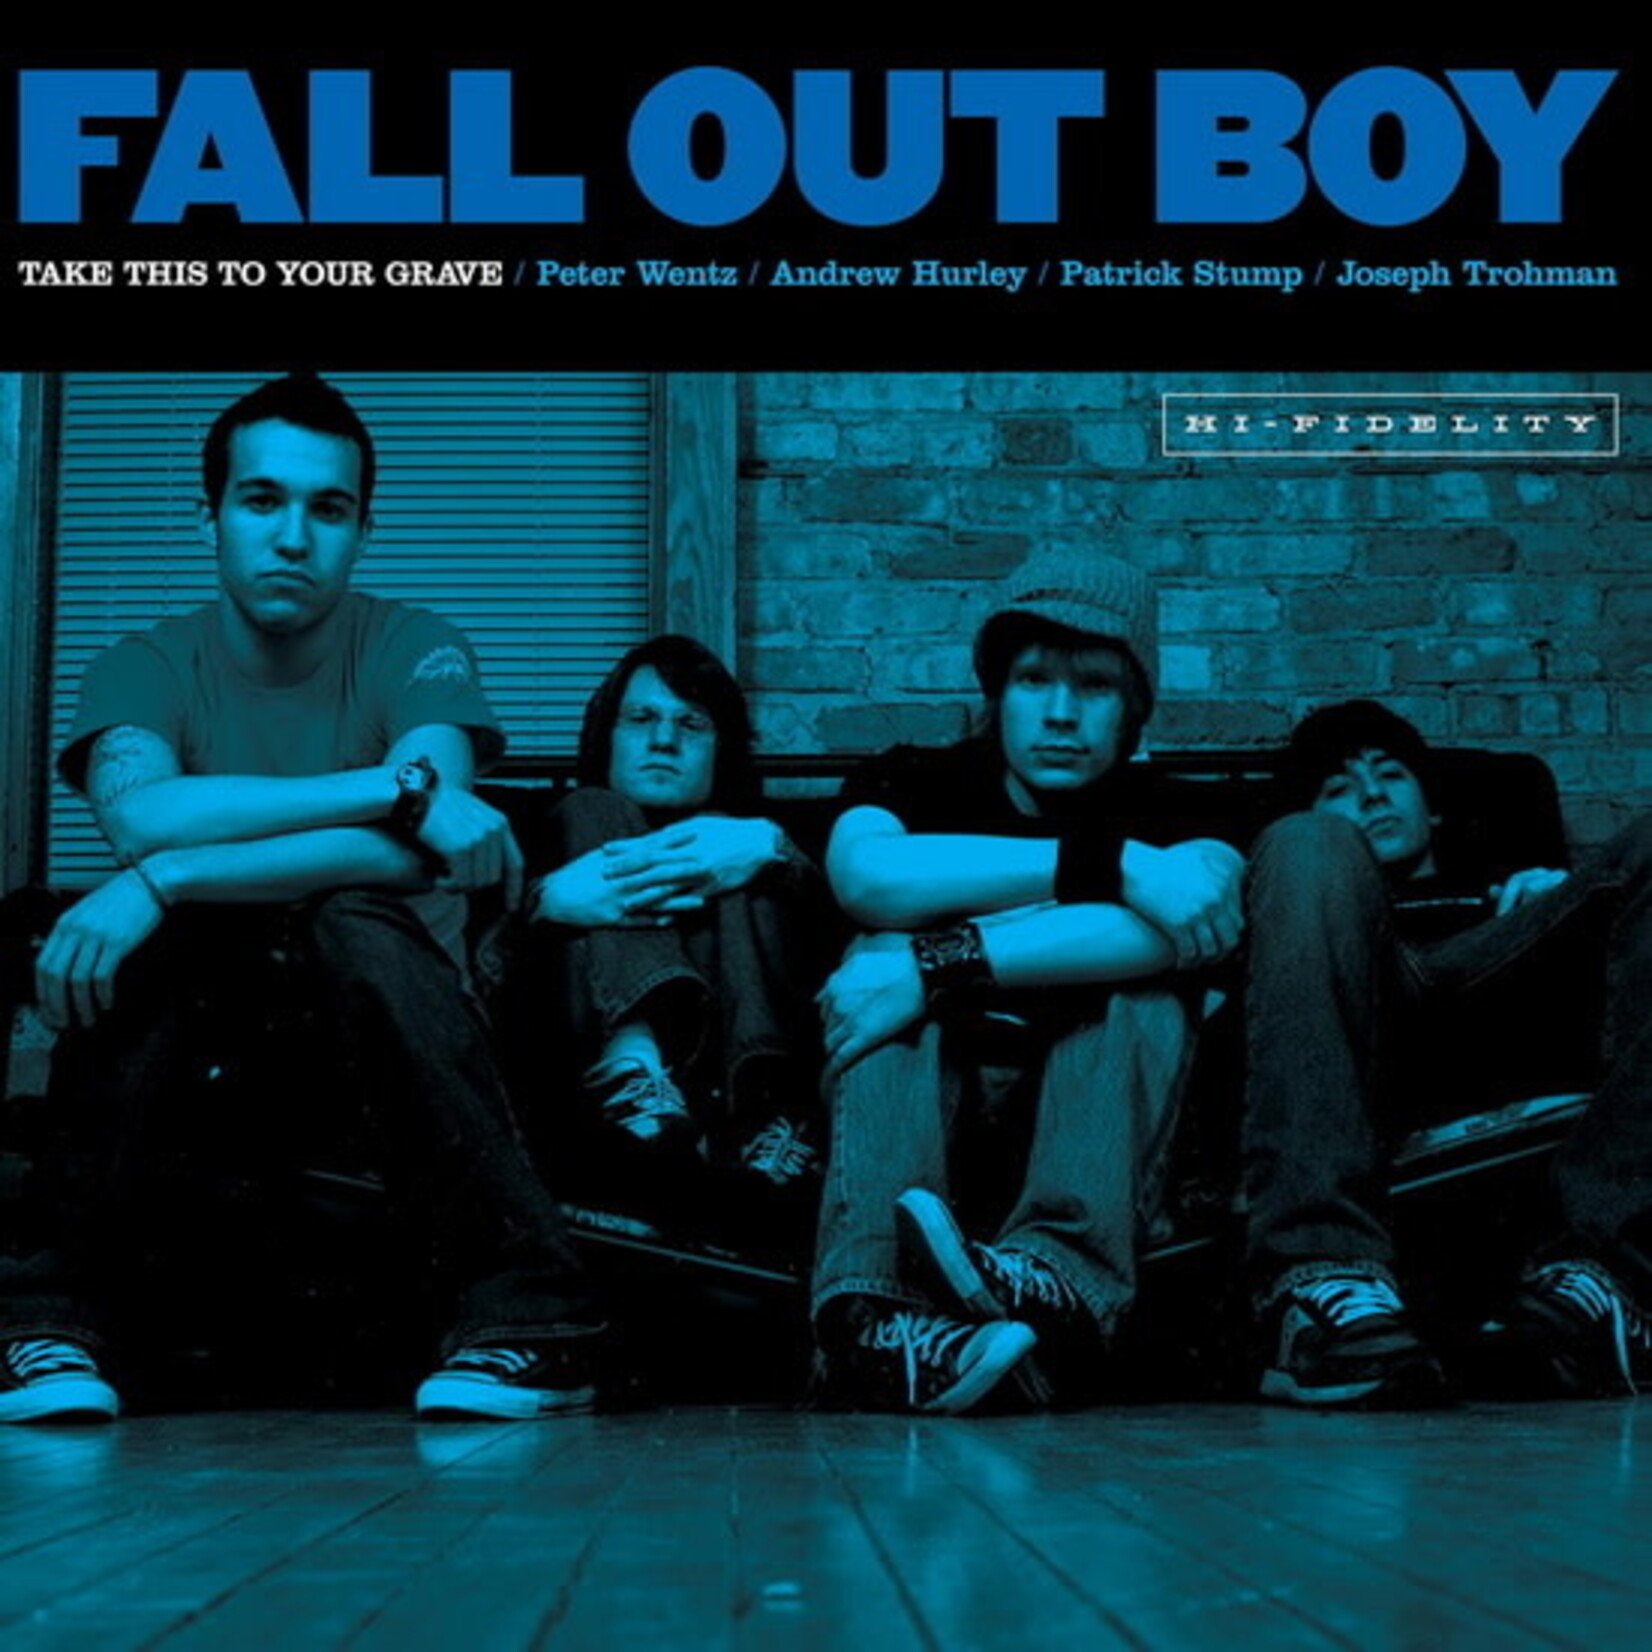 [New] Fall Out Boy - Take This To Your Grave (20th Anniversary, blue jay vinyl w/bonus)